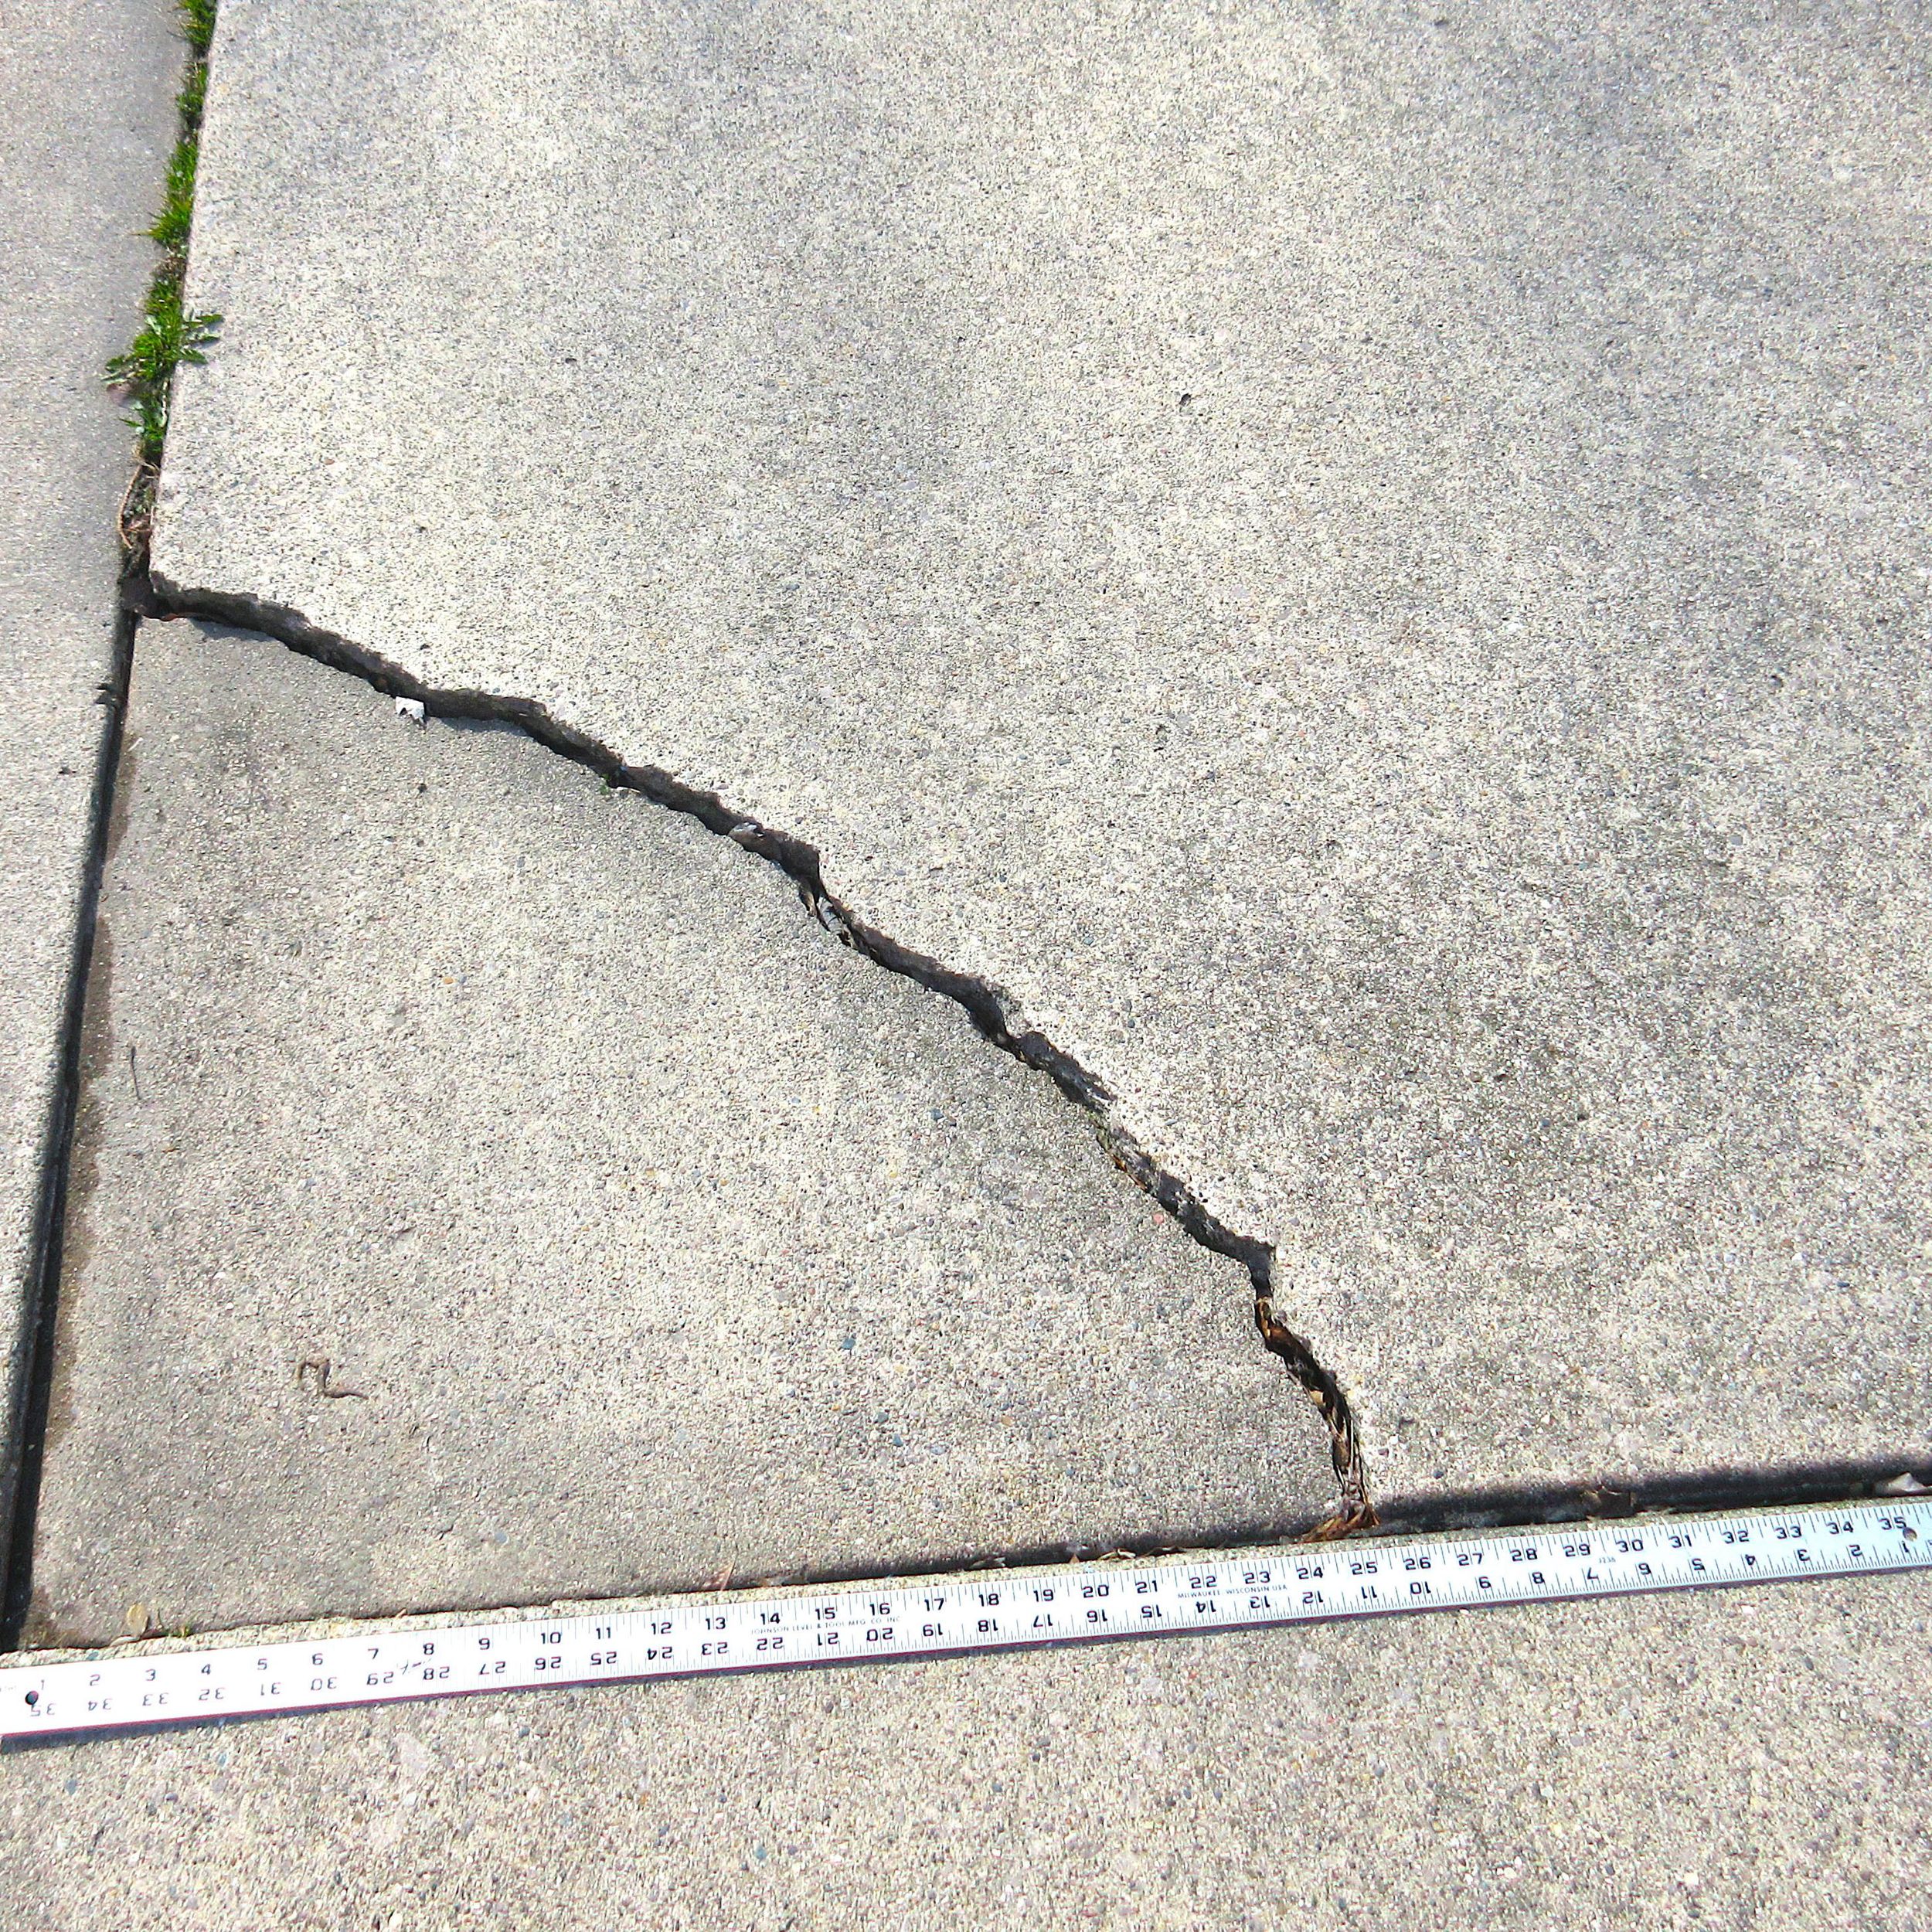 Ask the Builder: A repair for cracked concrete that almost looks